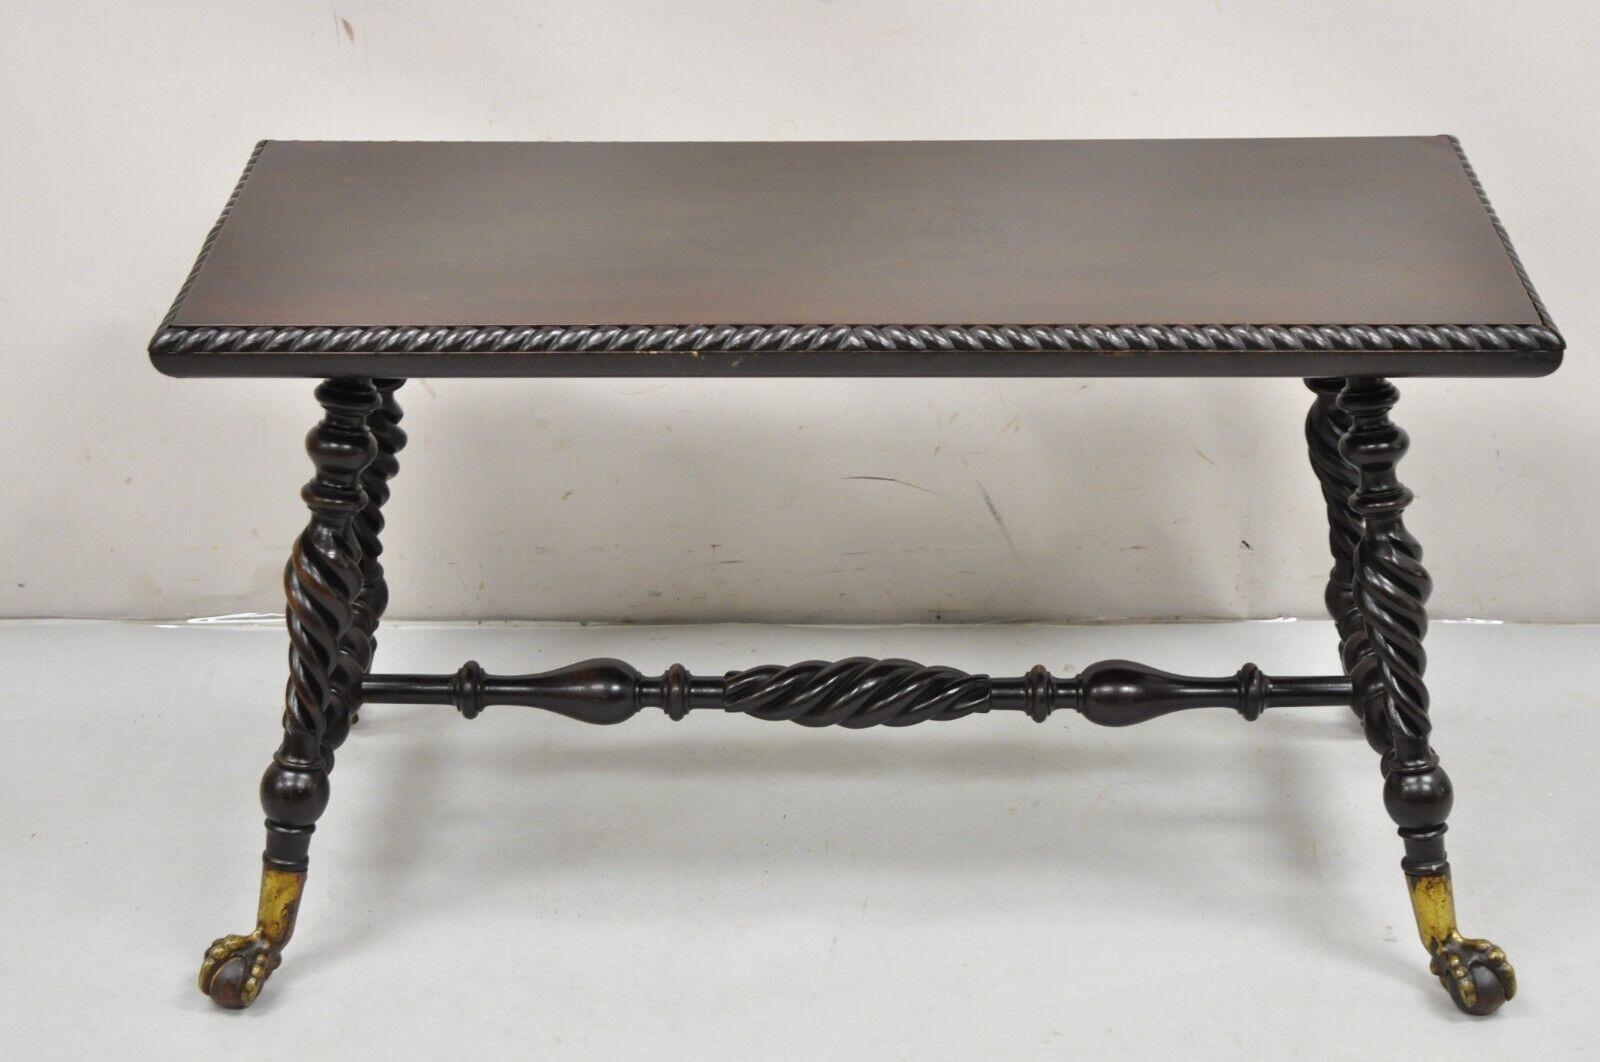 Antique Merklen Brothers Victorian Barley Twist Mahogany Ball and Claw Coffee Table Piano Bench. Circa 19th Century.
Measurements: 
Overall: 20.5